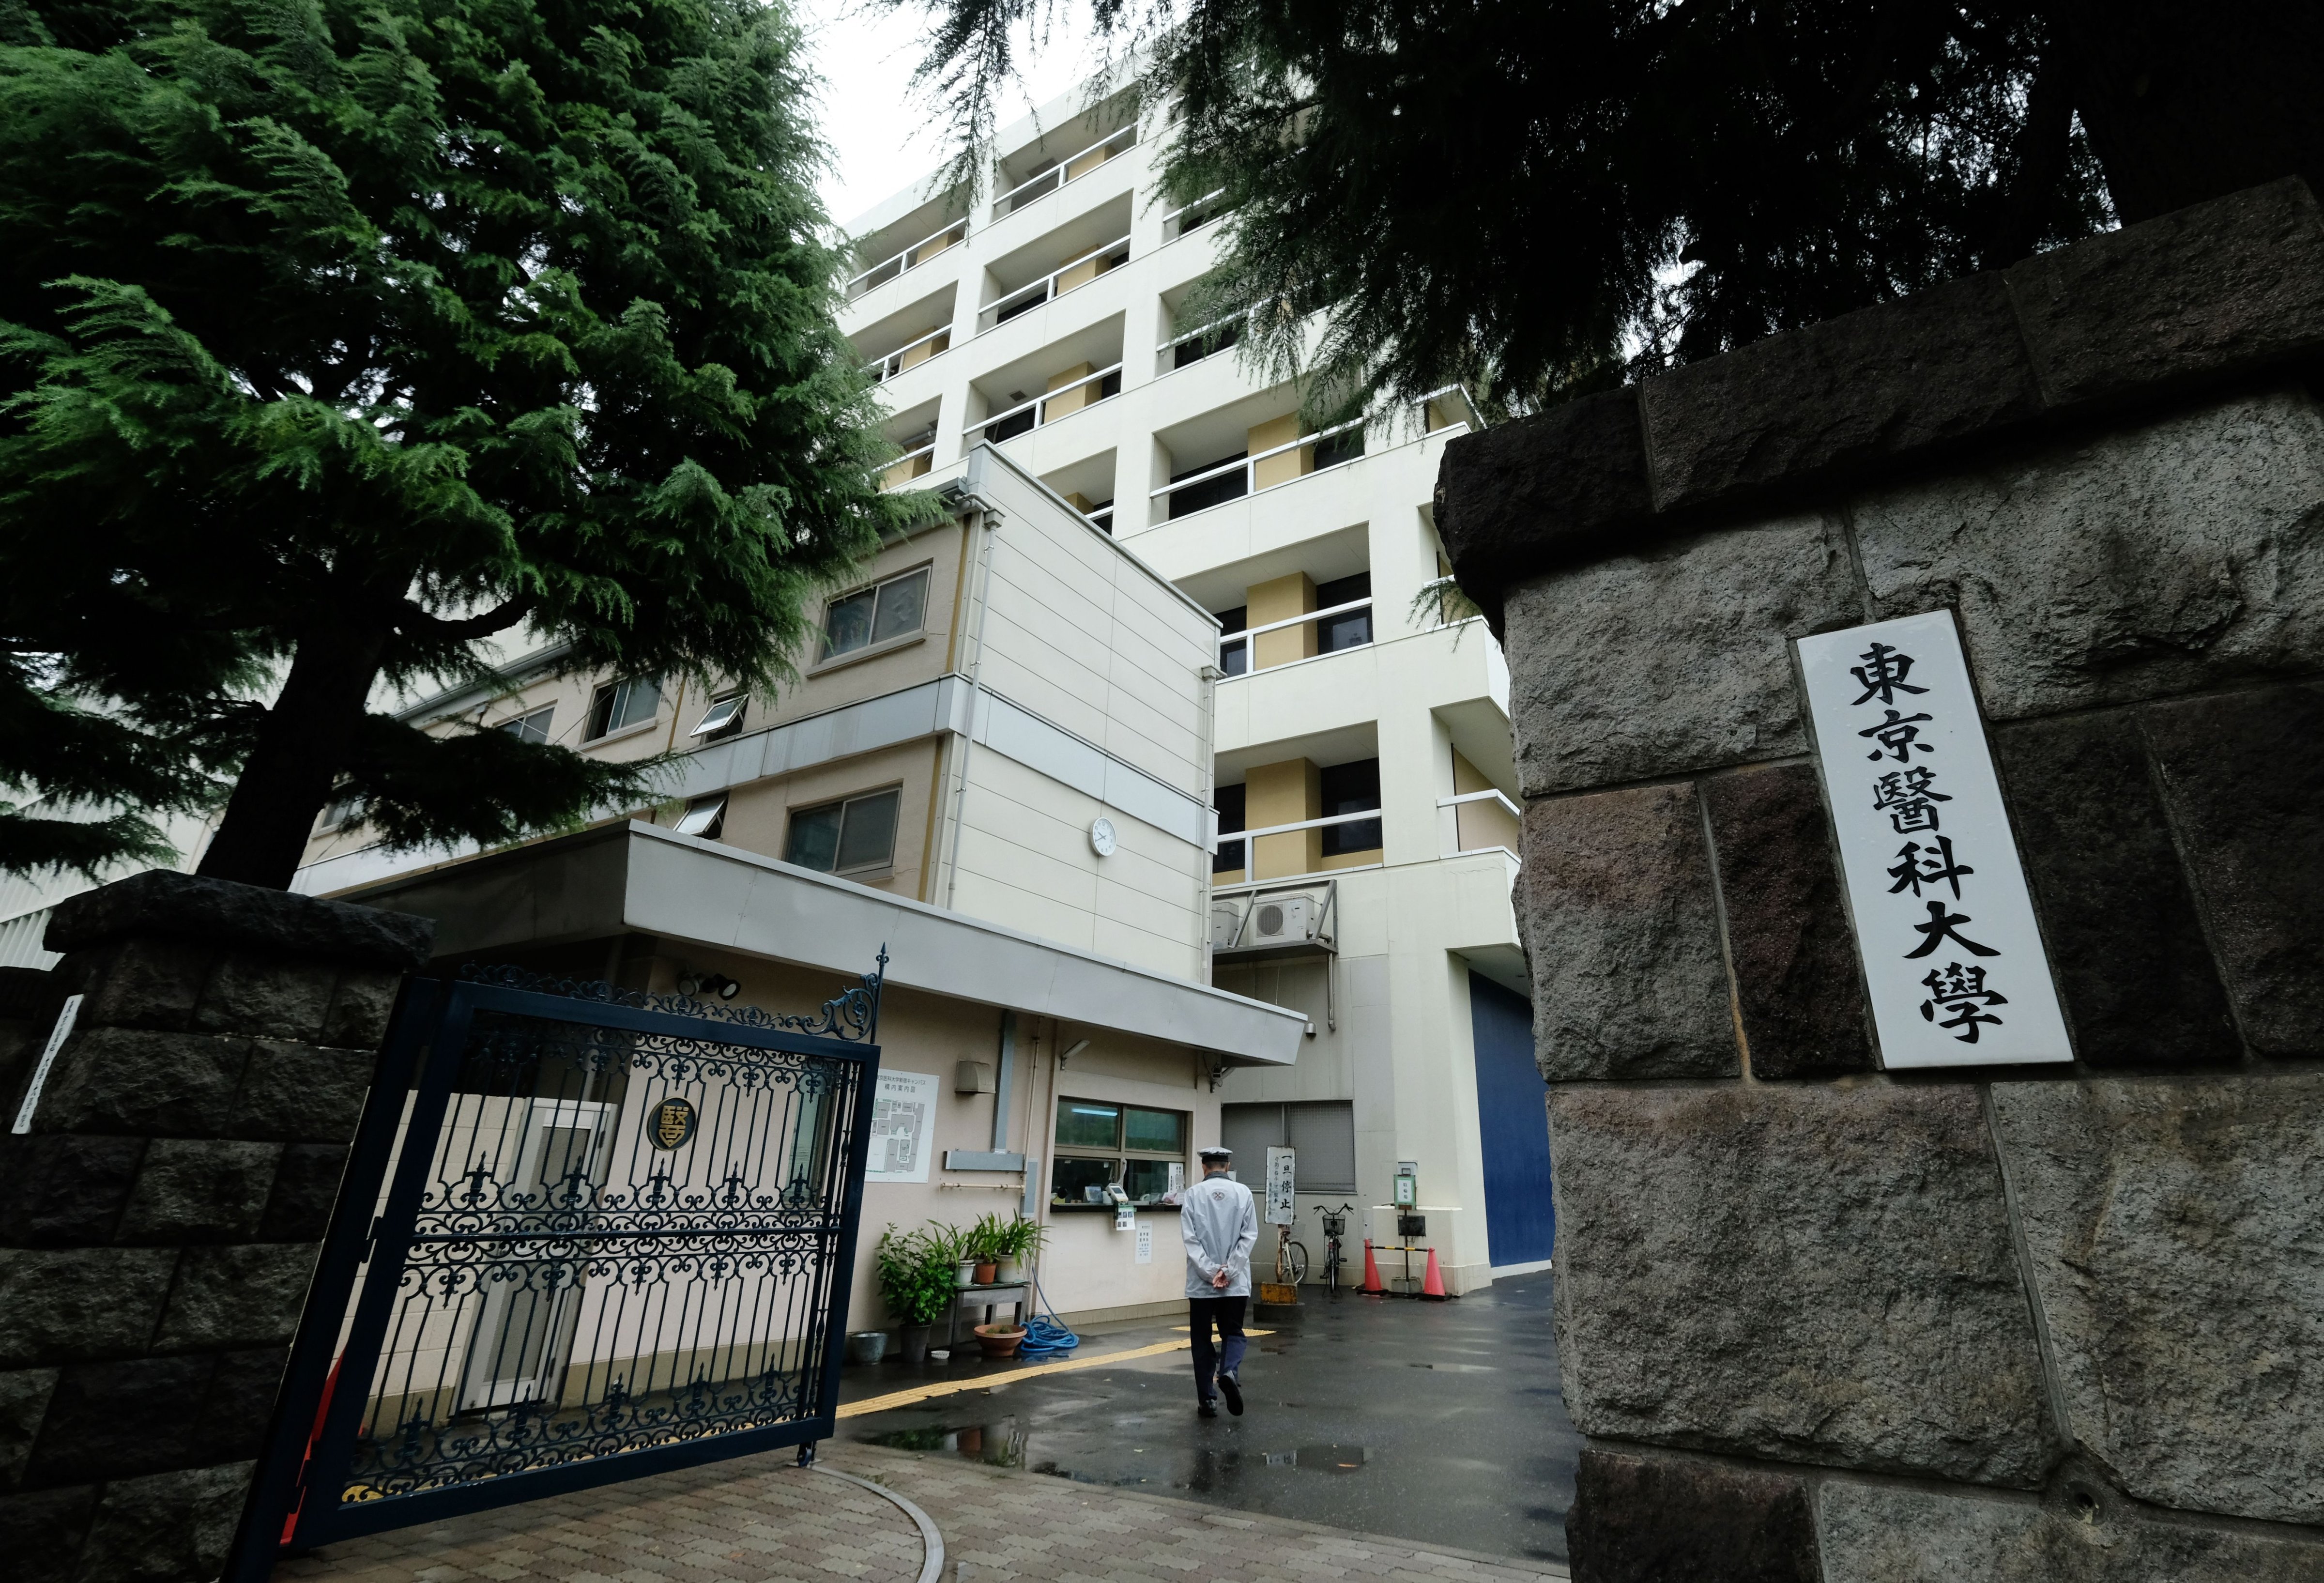 The entrance to the Tokyo Medical University is seen in Tokyo on Aug. 8, 2018. (Kazuhiro Nogi—AFP/Getty Images)